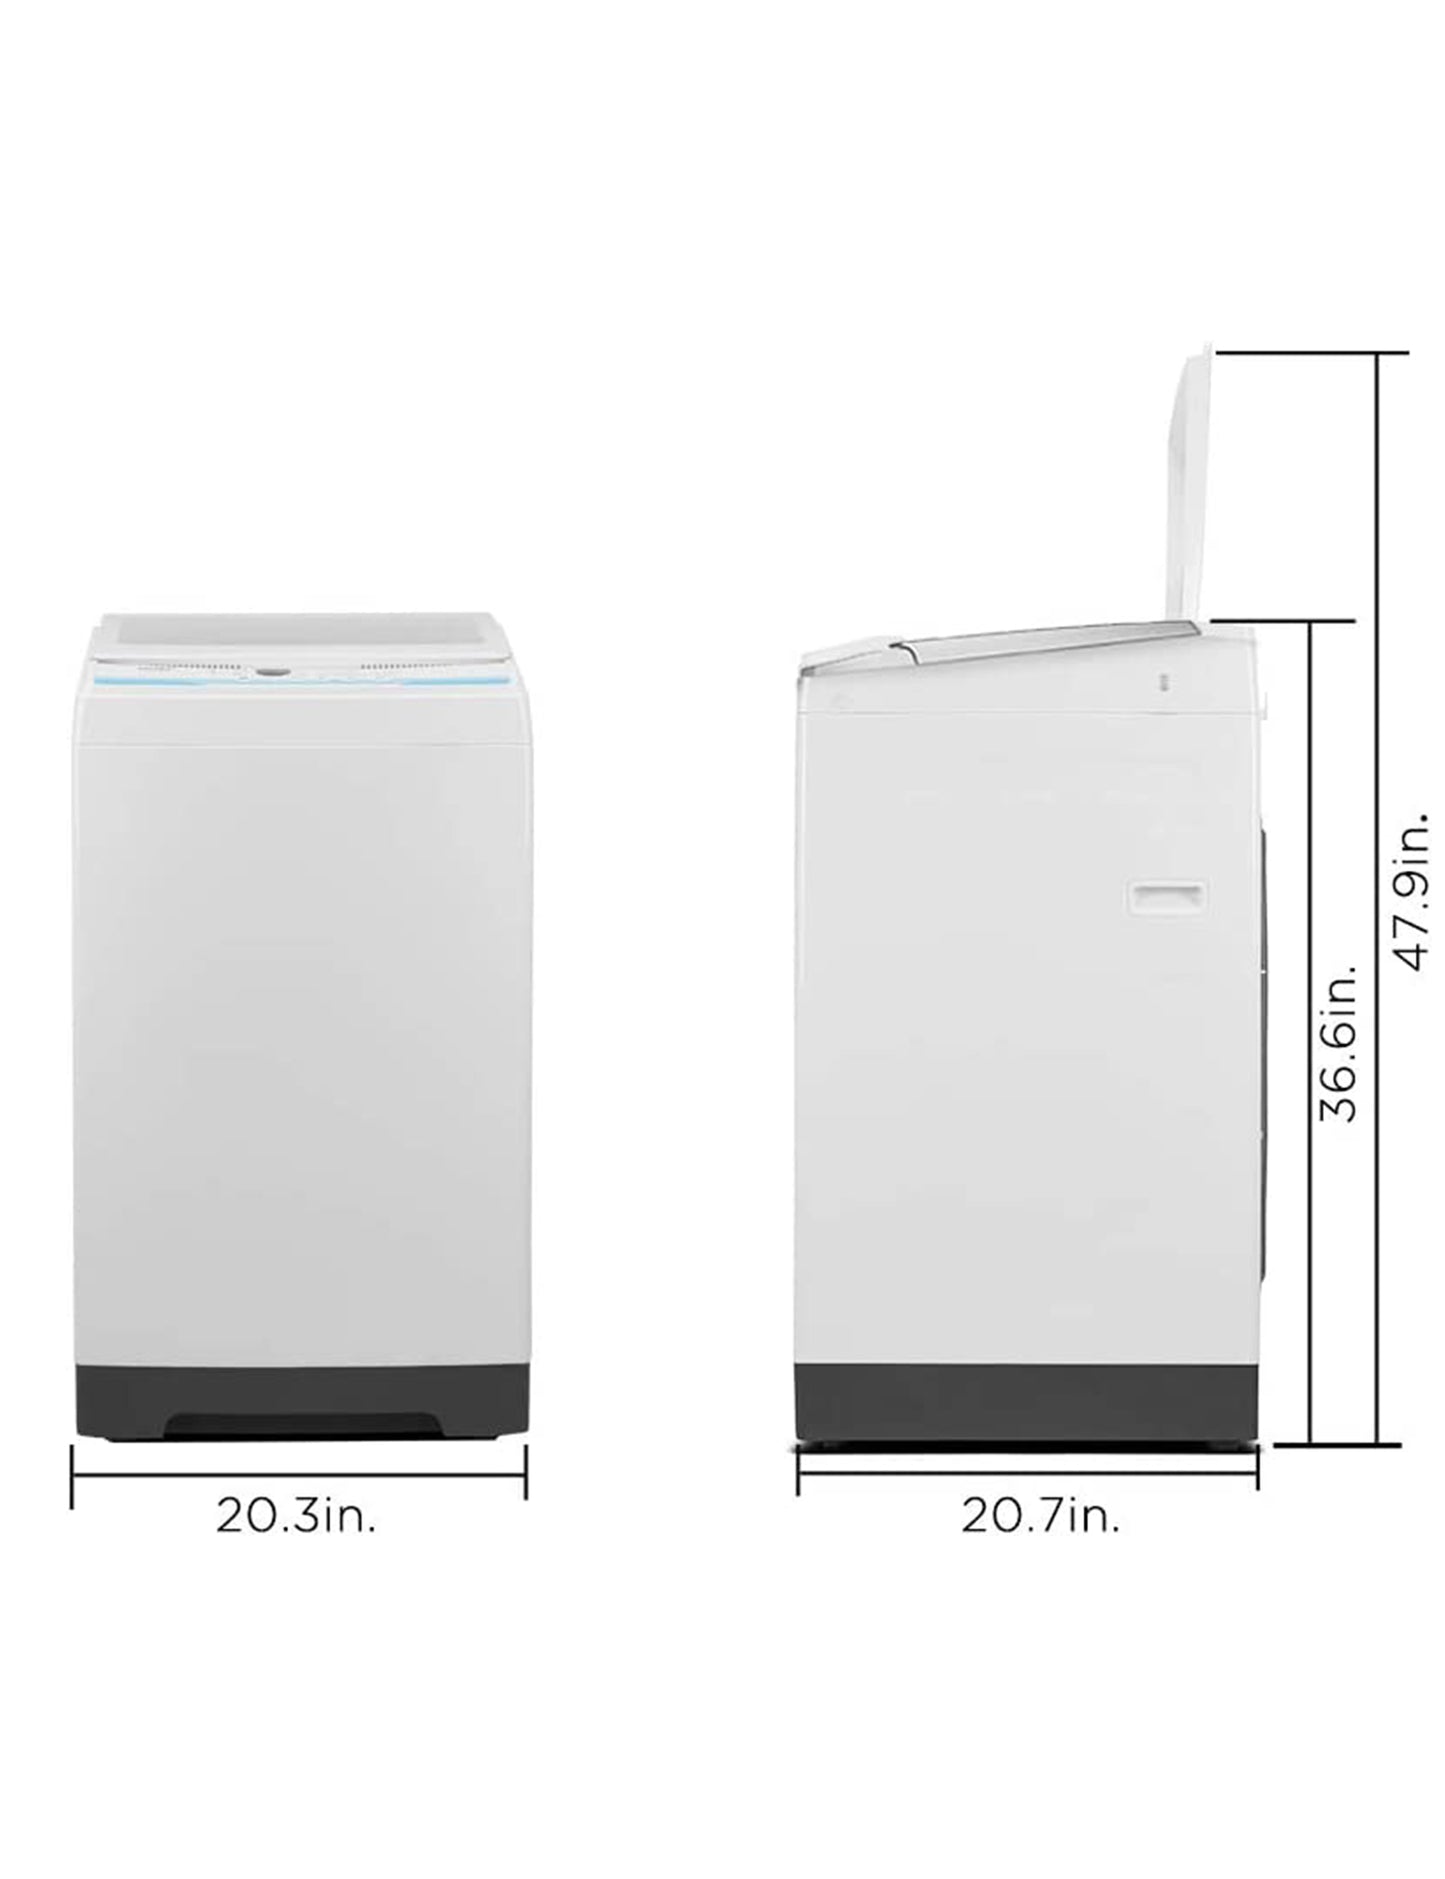 dimensions of white portable comfee washer